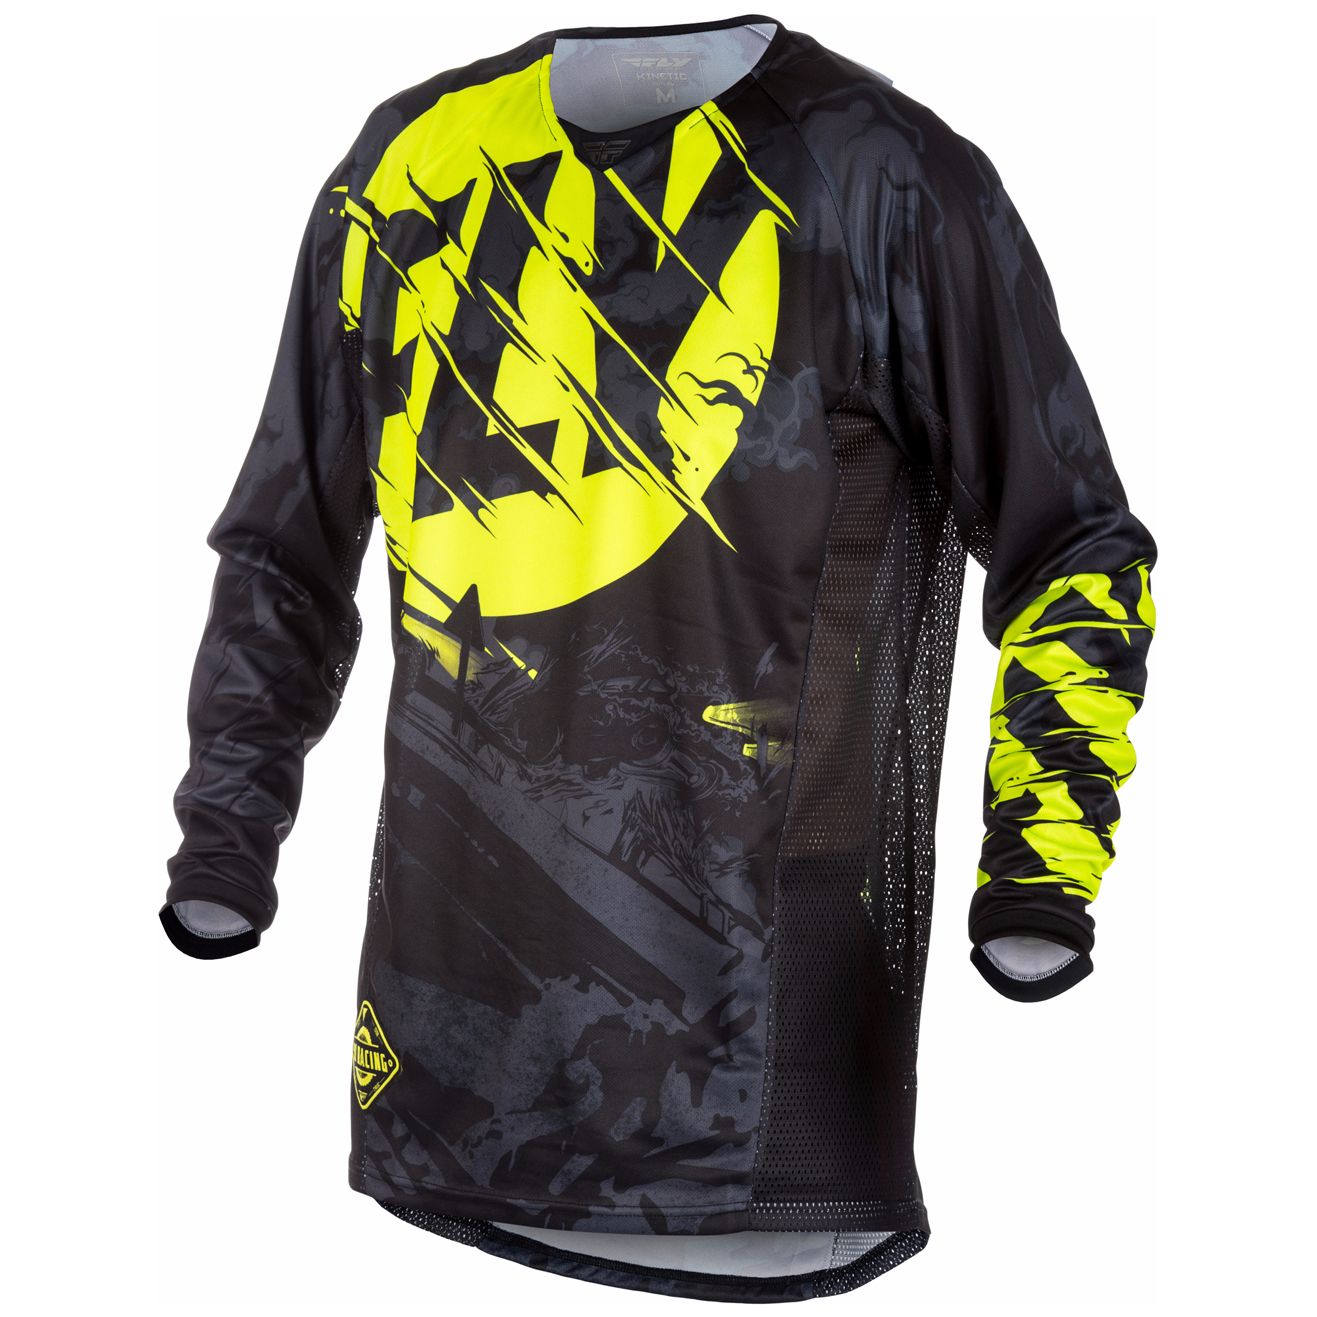 Maillot Cross Fly Kinetic Youth Outlaw - Noir Jaune Fluo -